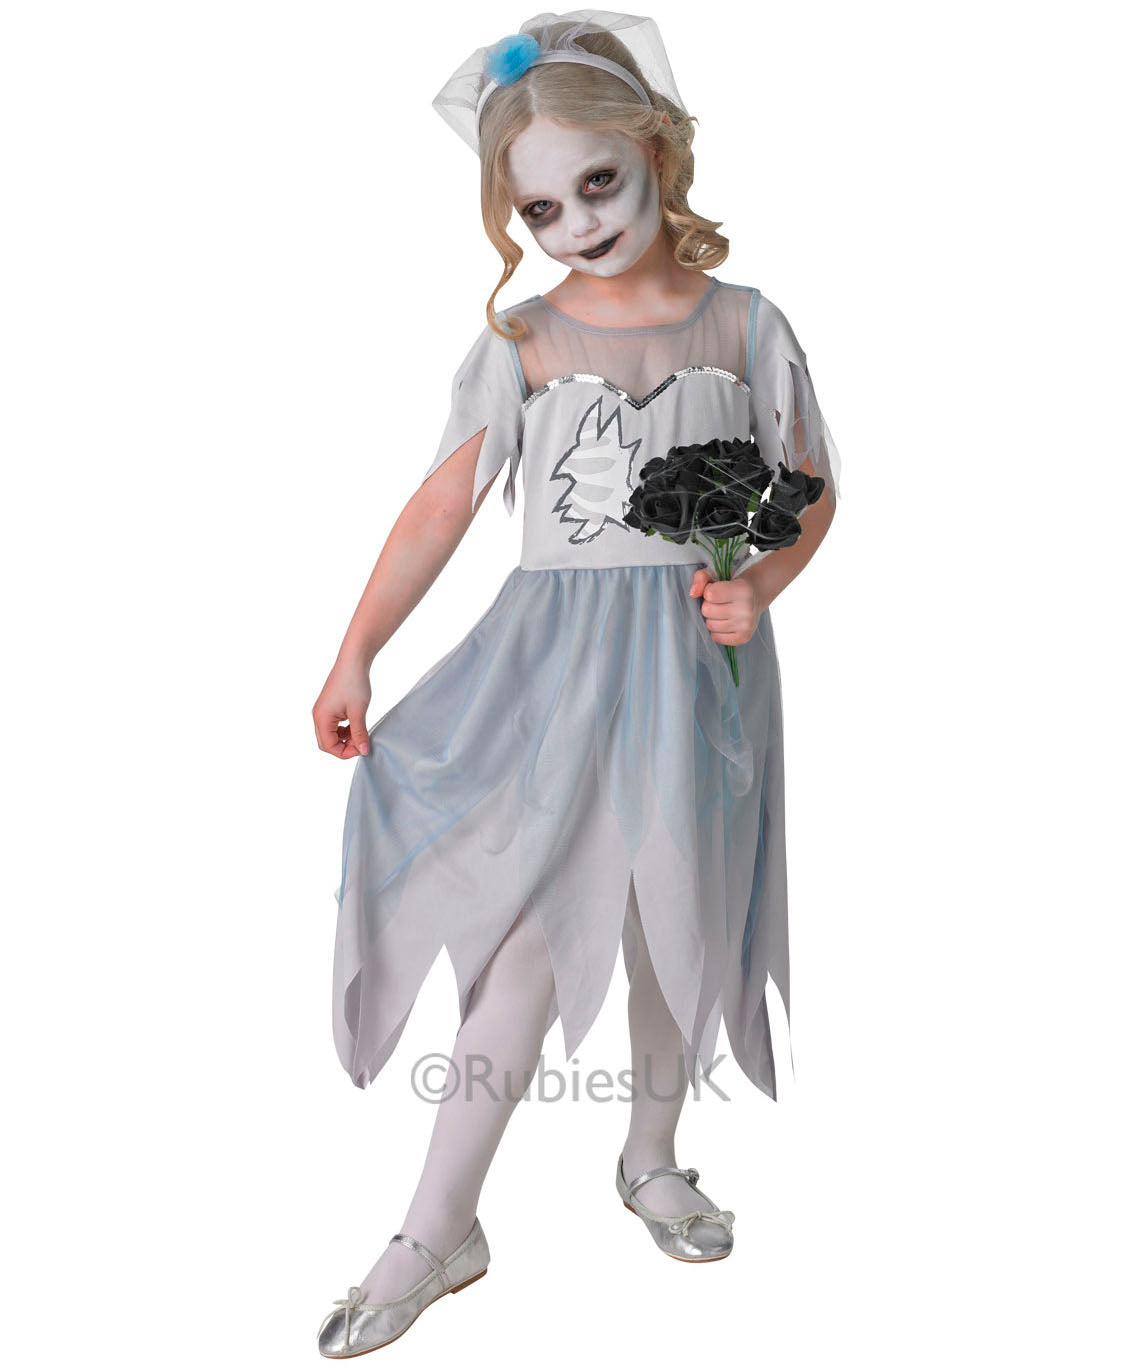 Corpse Bride Costume, Age 3-4 years